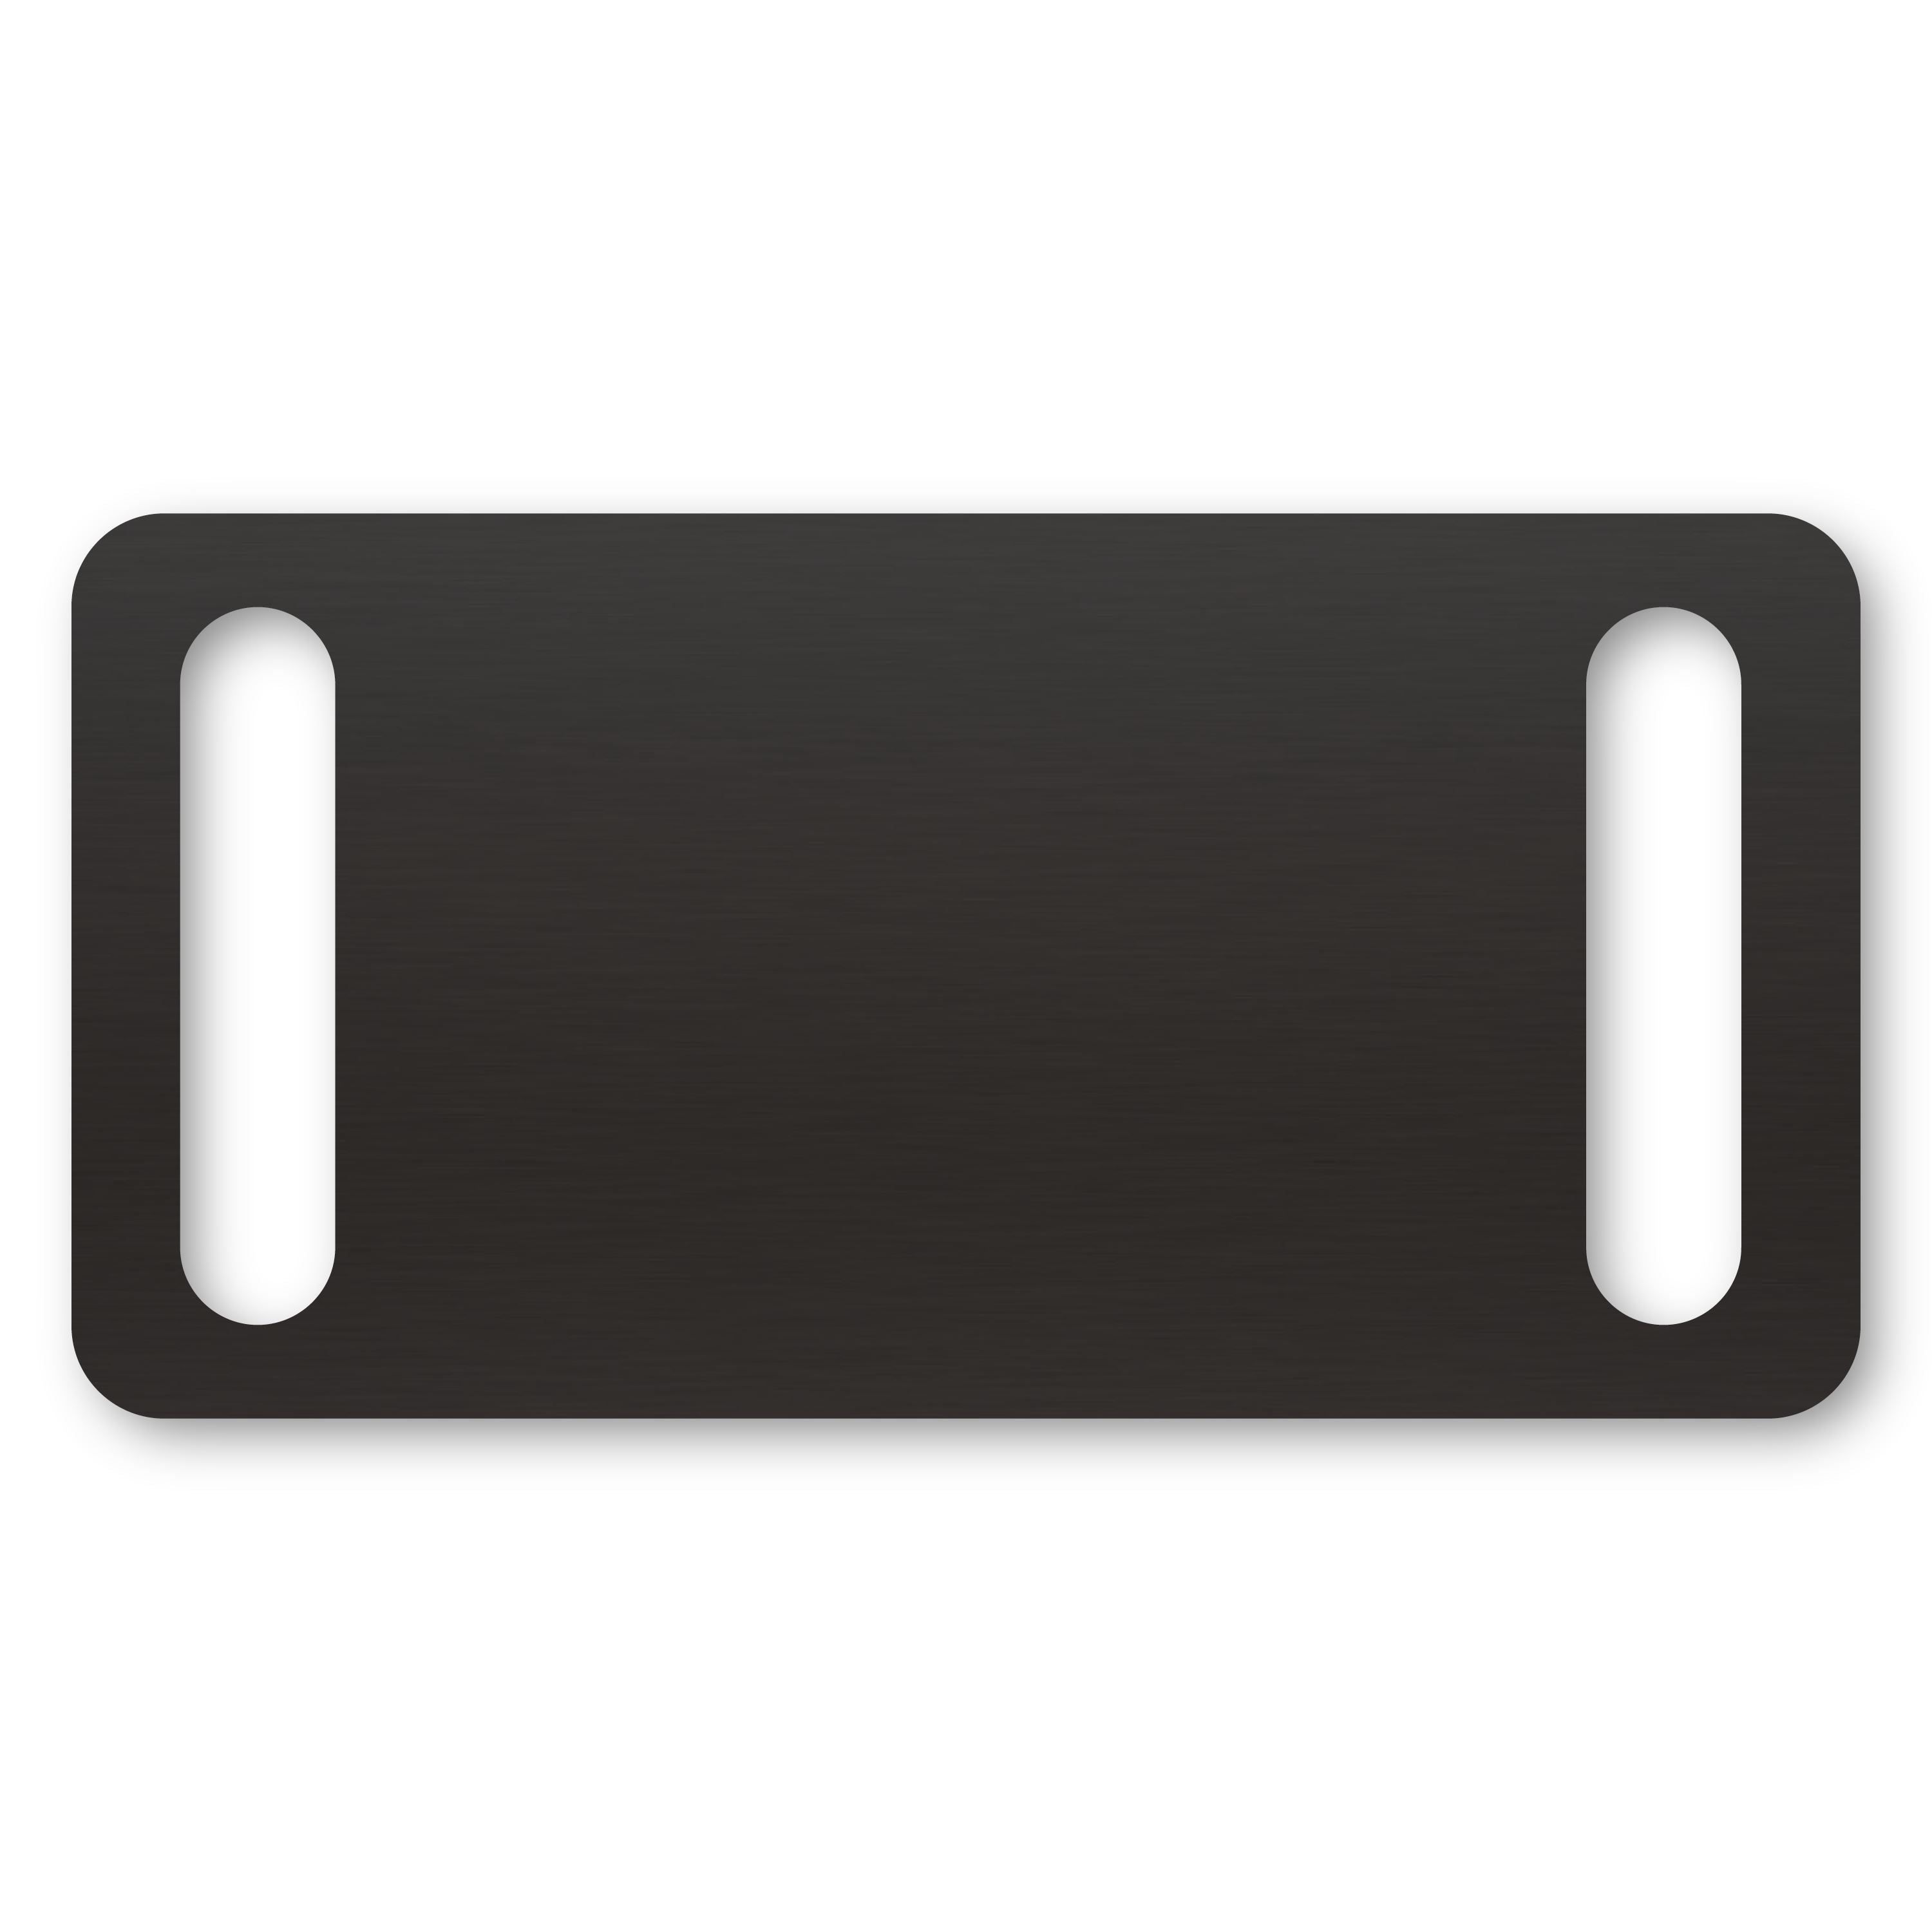 Anodized Aluminum Rectangle Slide-On Tags, 1-3/16" x 2" with 1/4" x 1" Slot, Laser Engraved Metal Tags Craftworks NW Black 